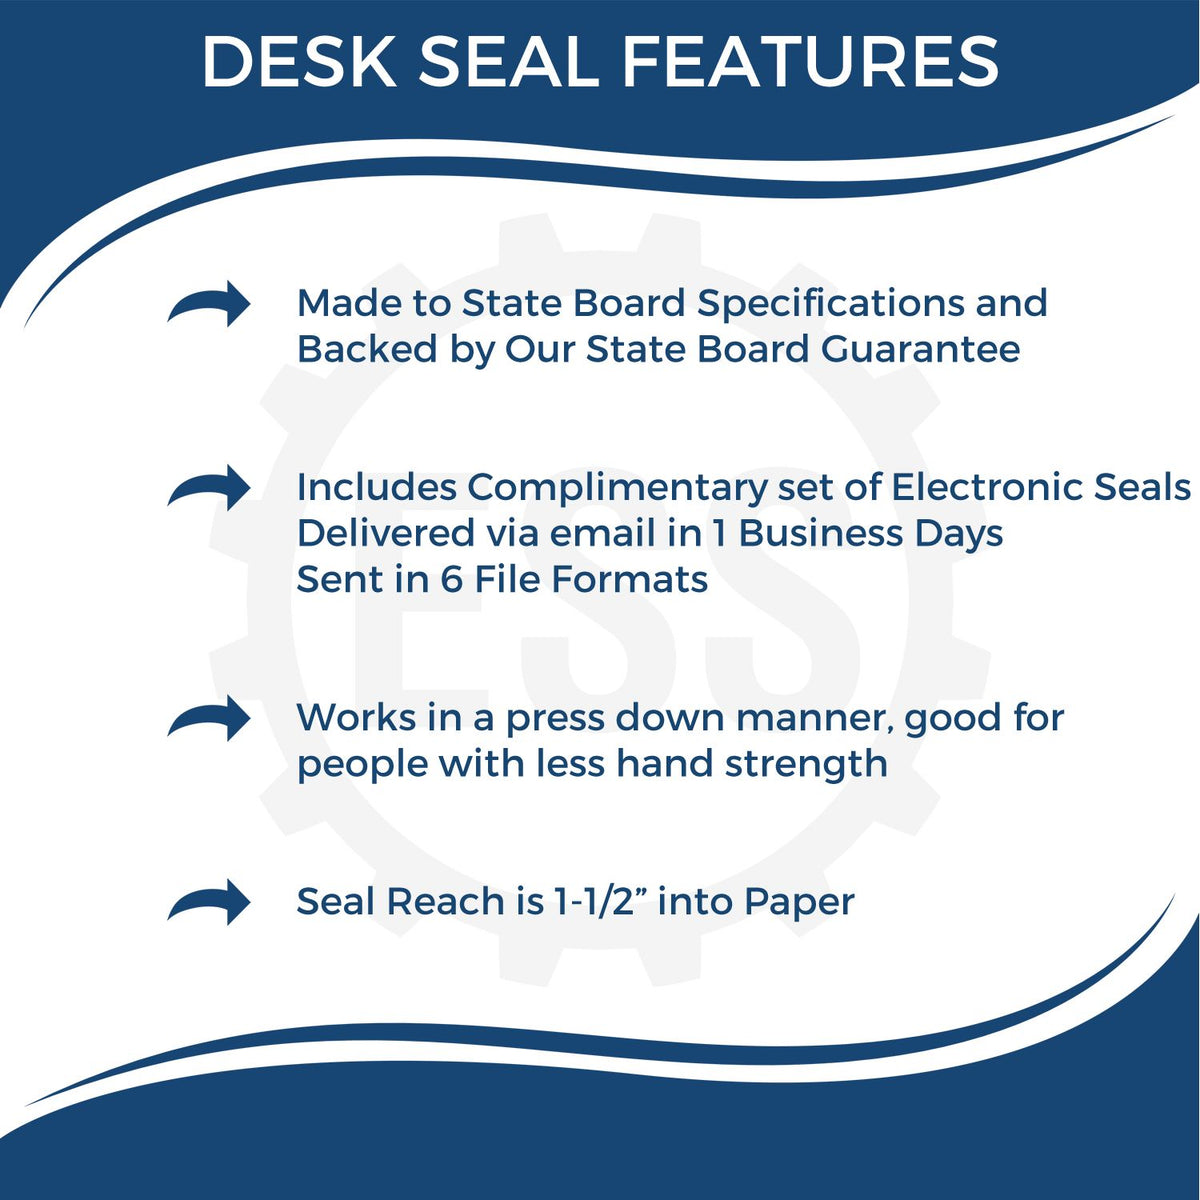 A picture of an infographic highlighting the selling points for the Maine Desk Architect Embossing Seal